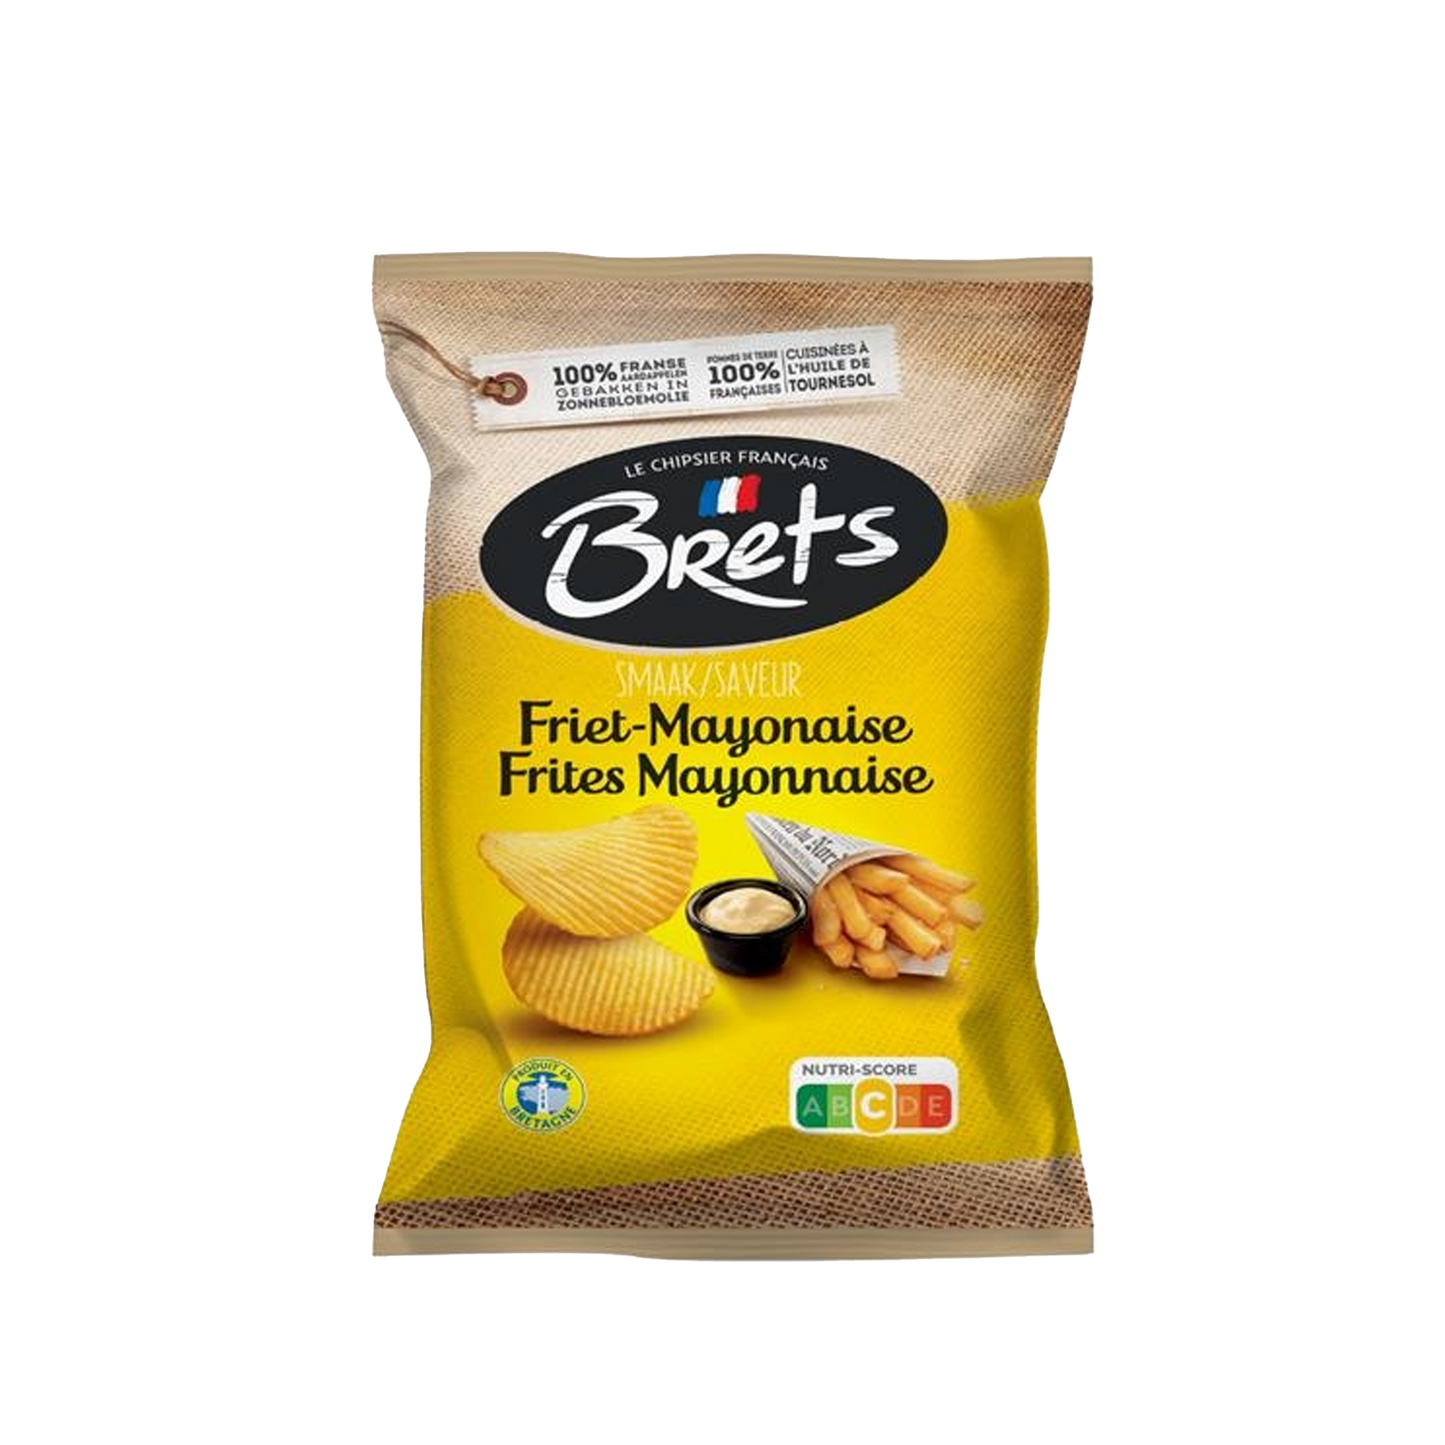 Brets Chips Friet-Mayonaise - 125g